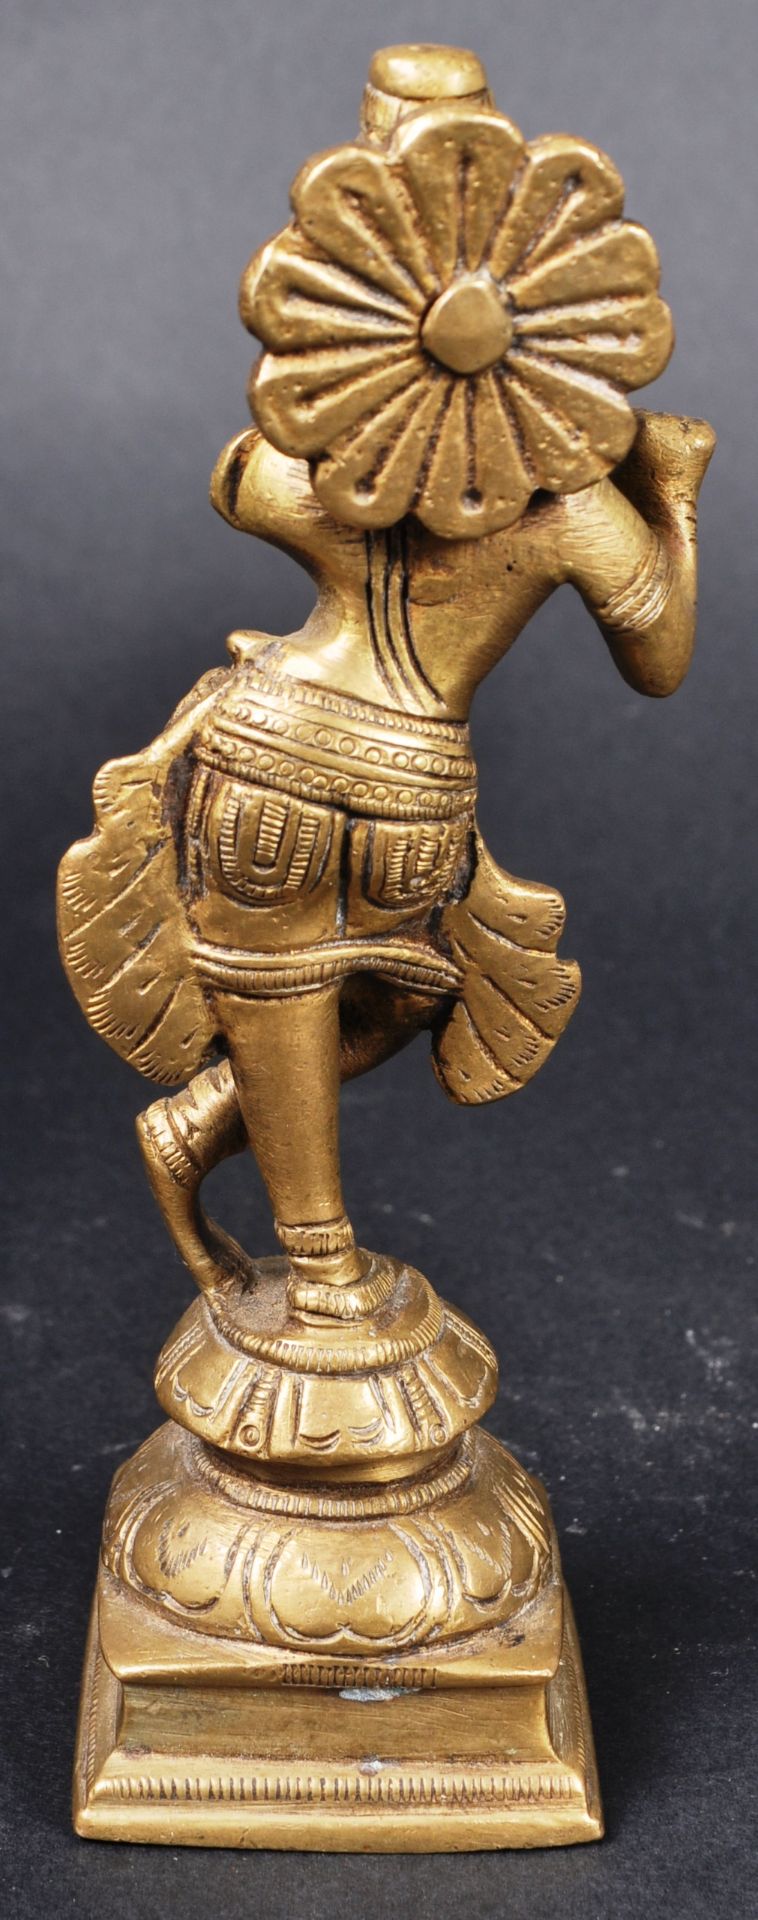 EARLY 20TH CENTURY BRONZE ORIENTAL MUSICIAN FIGURE - Image 6 of 7